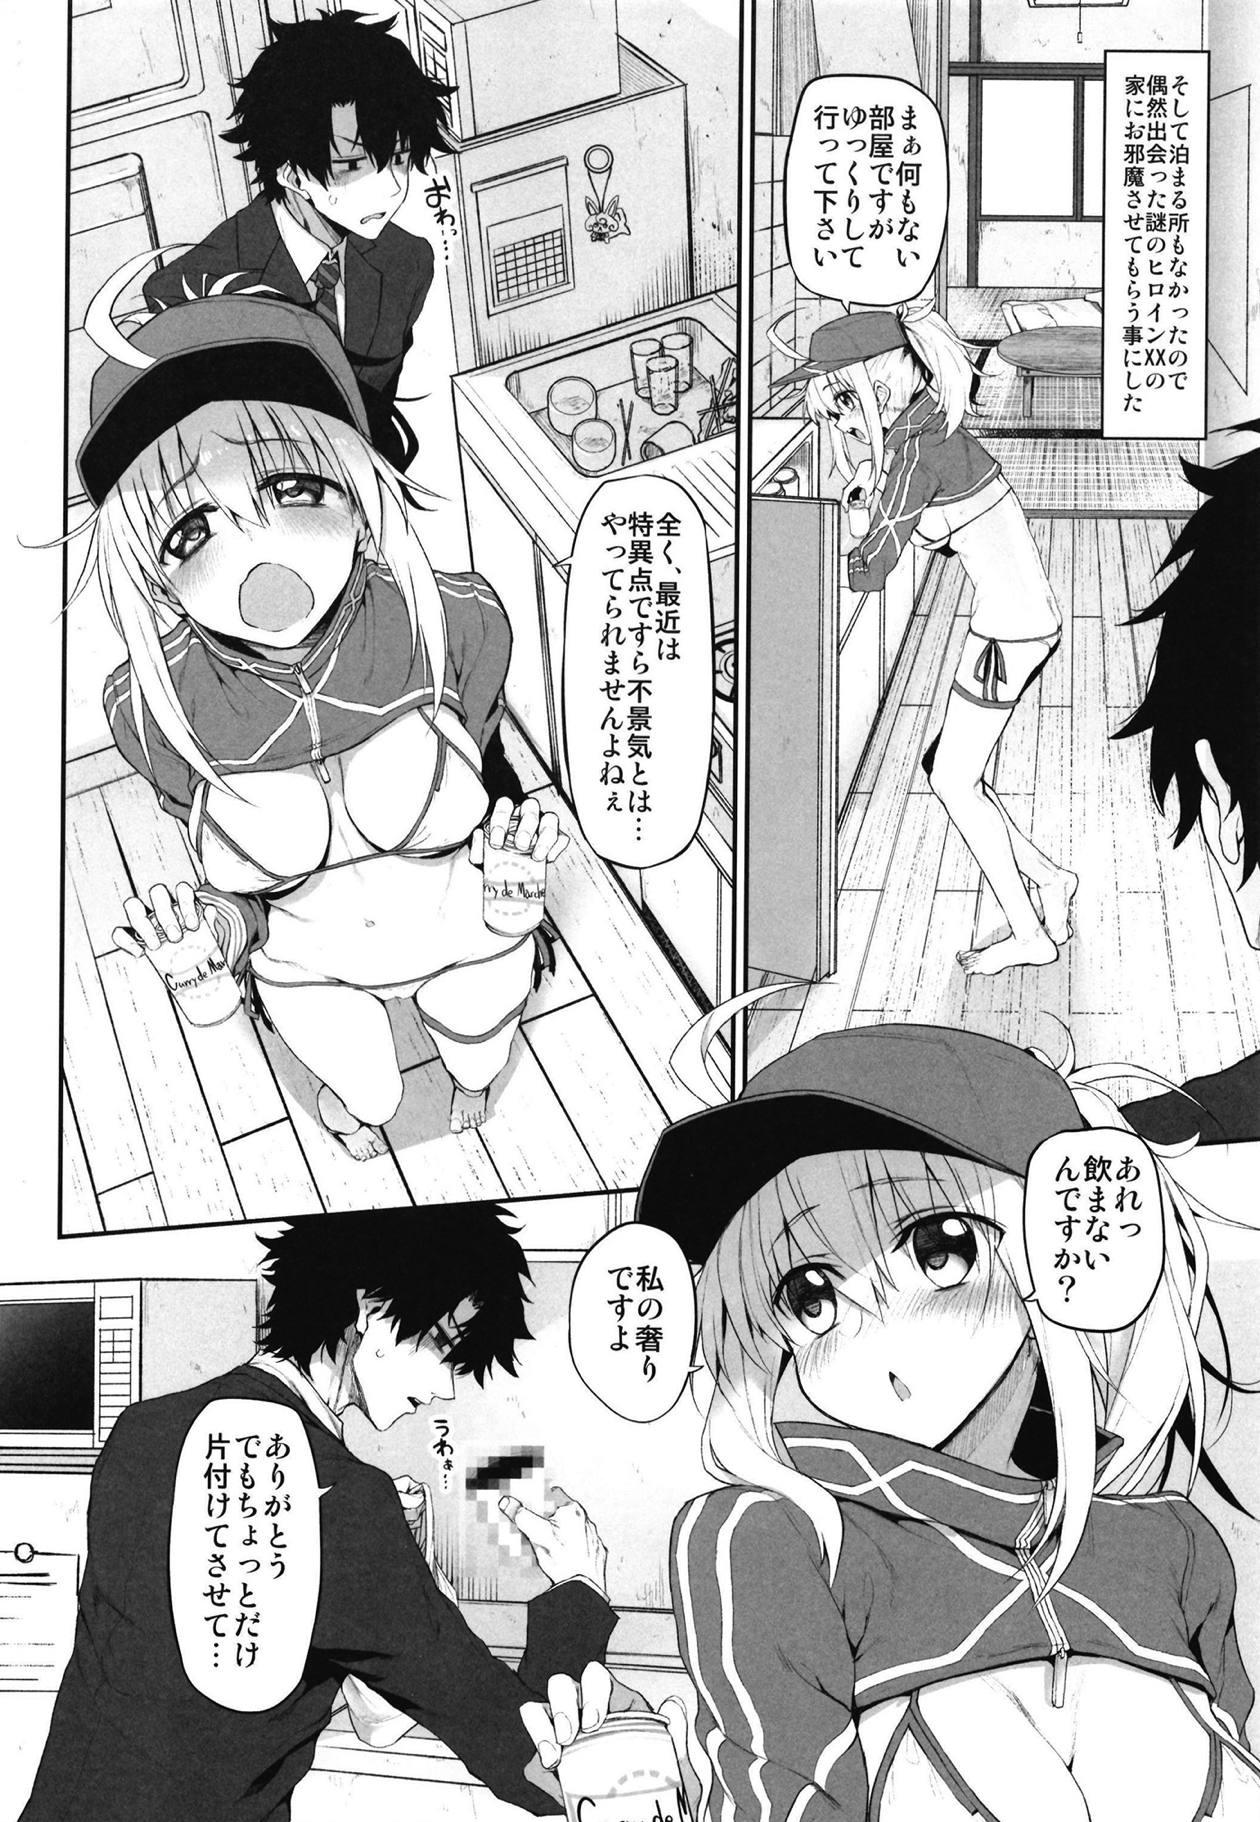 Putas Marked girls vol. 20 - Fate grand order Amateur - Page 5